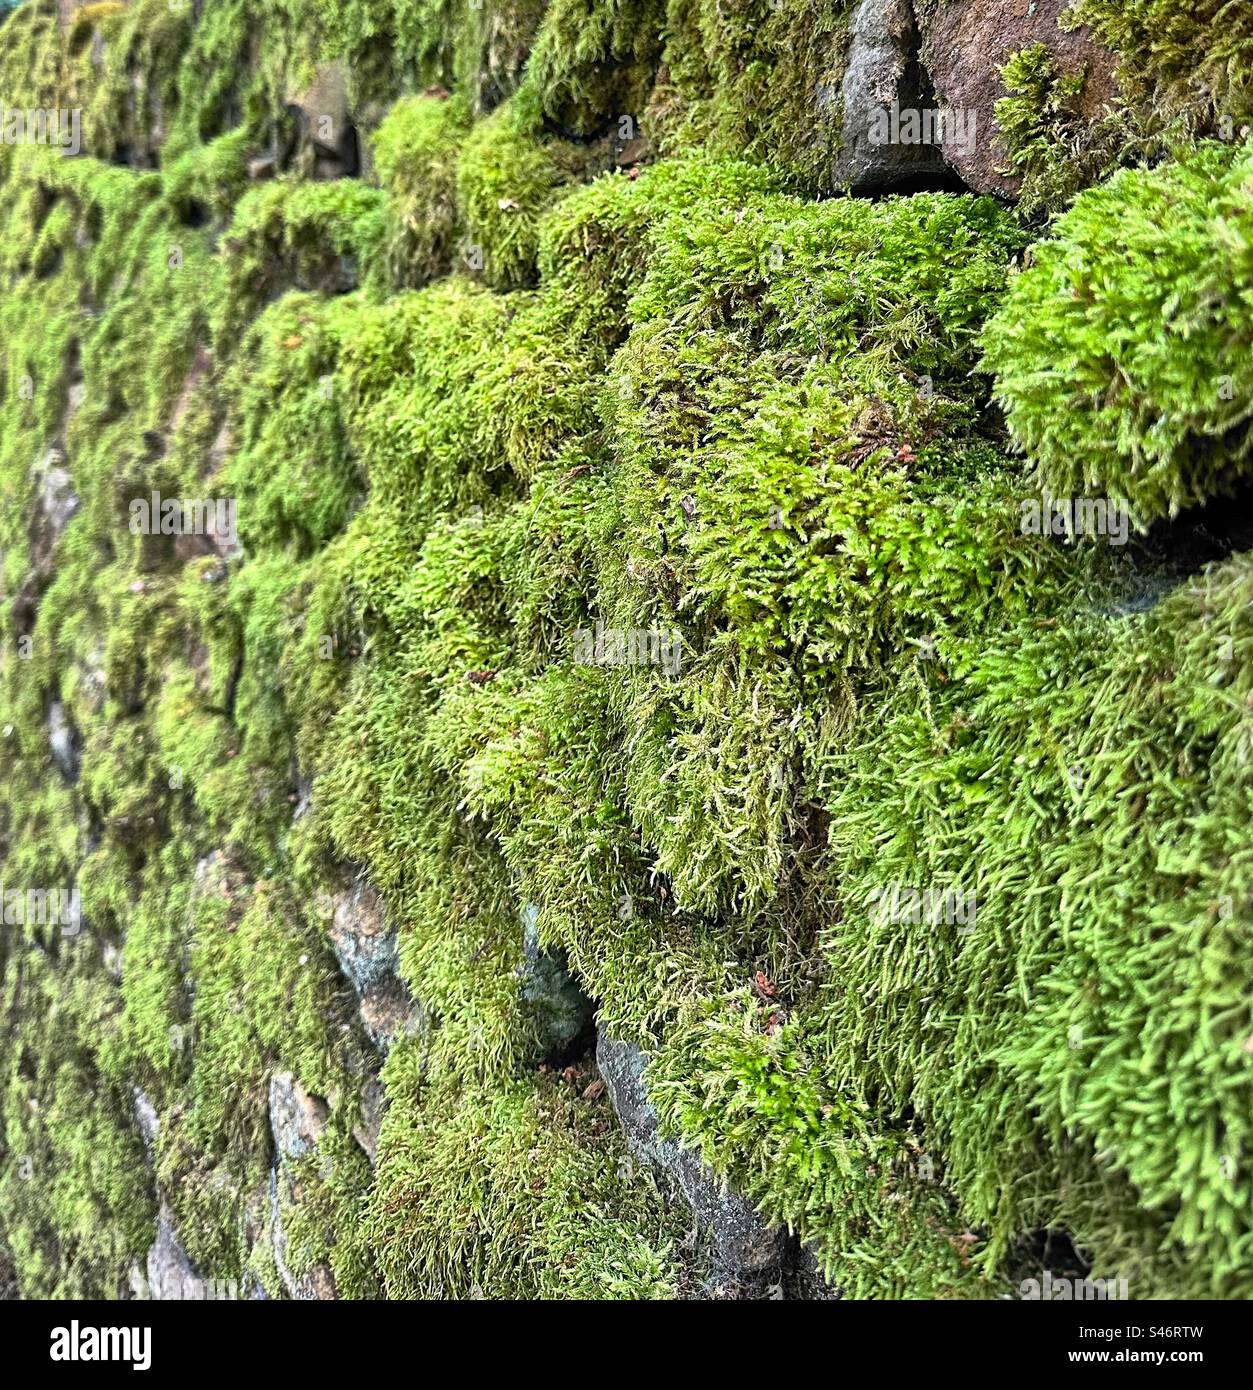 Common striated feather-moss (Scientific name - Eurhynchium striatum) grows on a dry stone wall in the countryside. Close up and full screen. Stock Photo